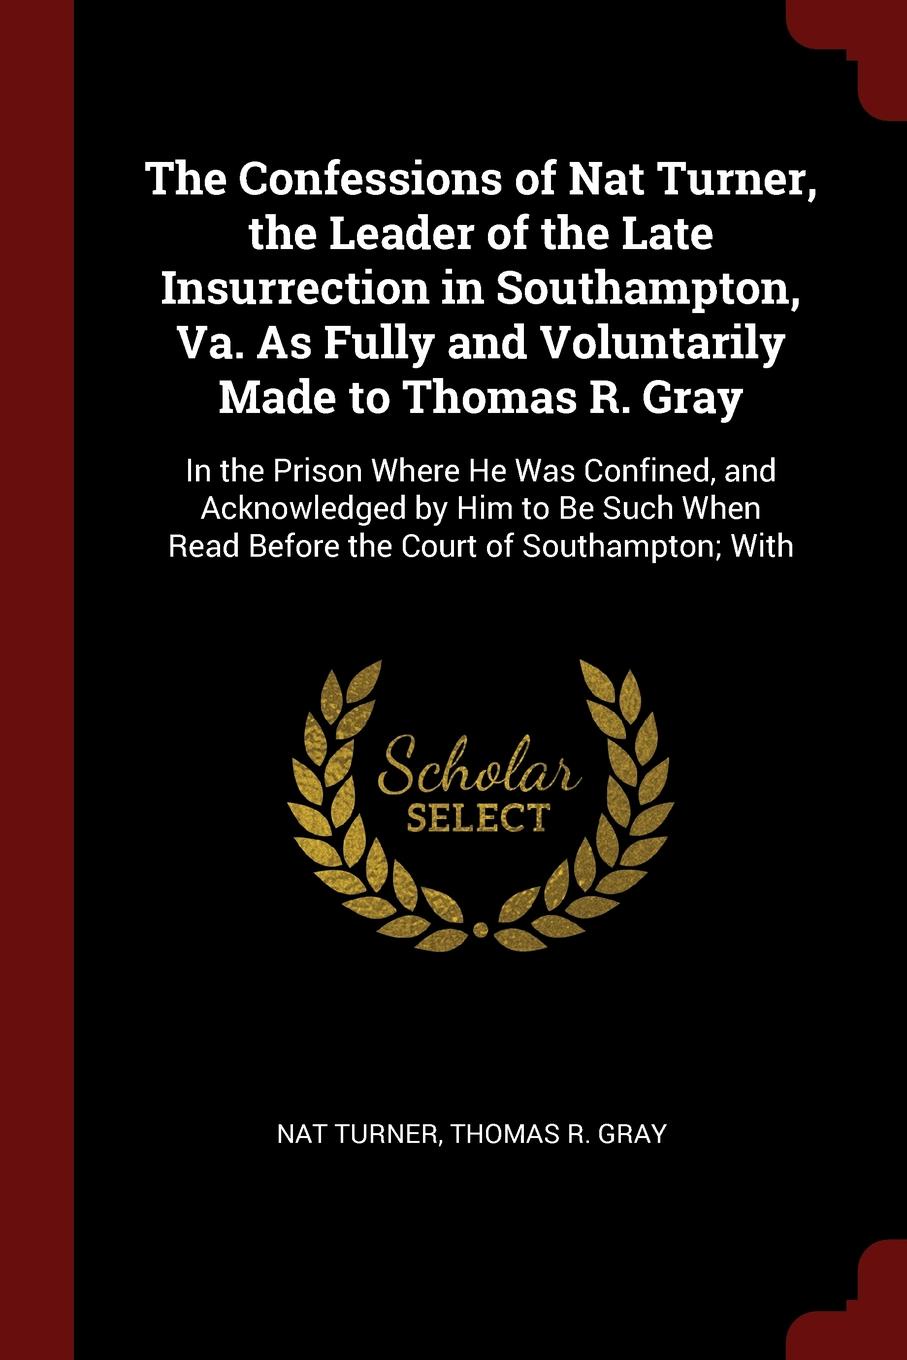 The Confessions of Nat Turner, the Leader of the Late Insurrection in Southampton, Va. As Fully and Voluntarily Made to Thomas R. Gray. In the Prison Where He Was Confined, and Acknowledged by Him to Be Such When Read Before the Court of Southampt...